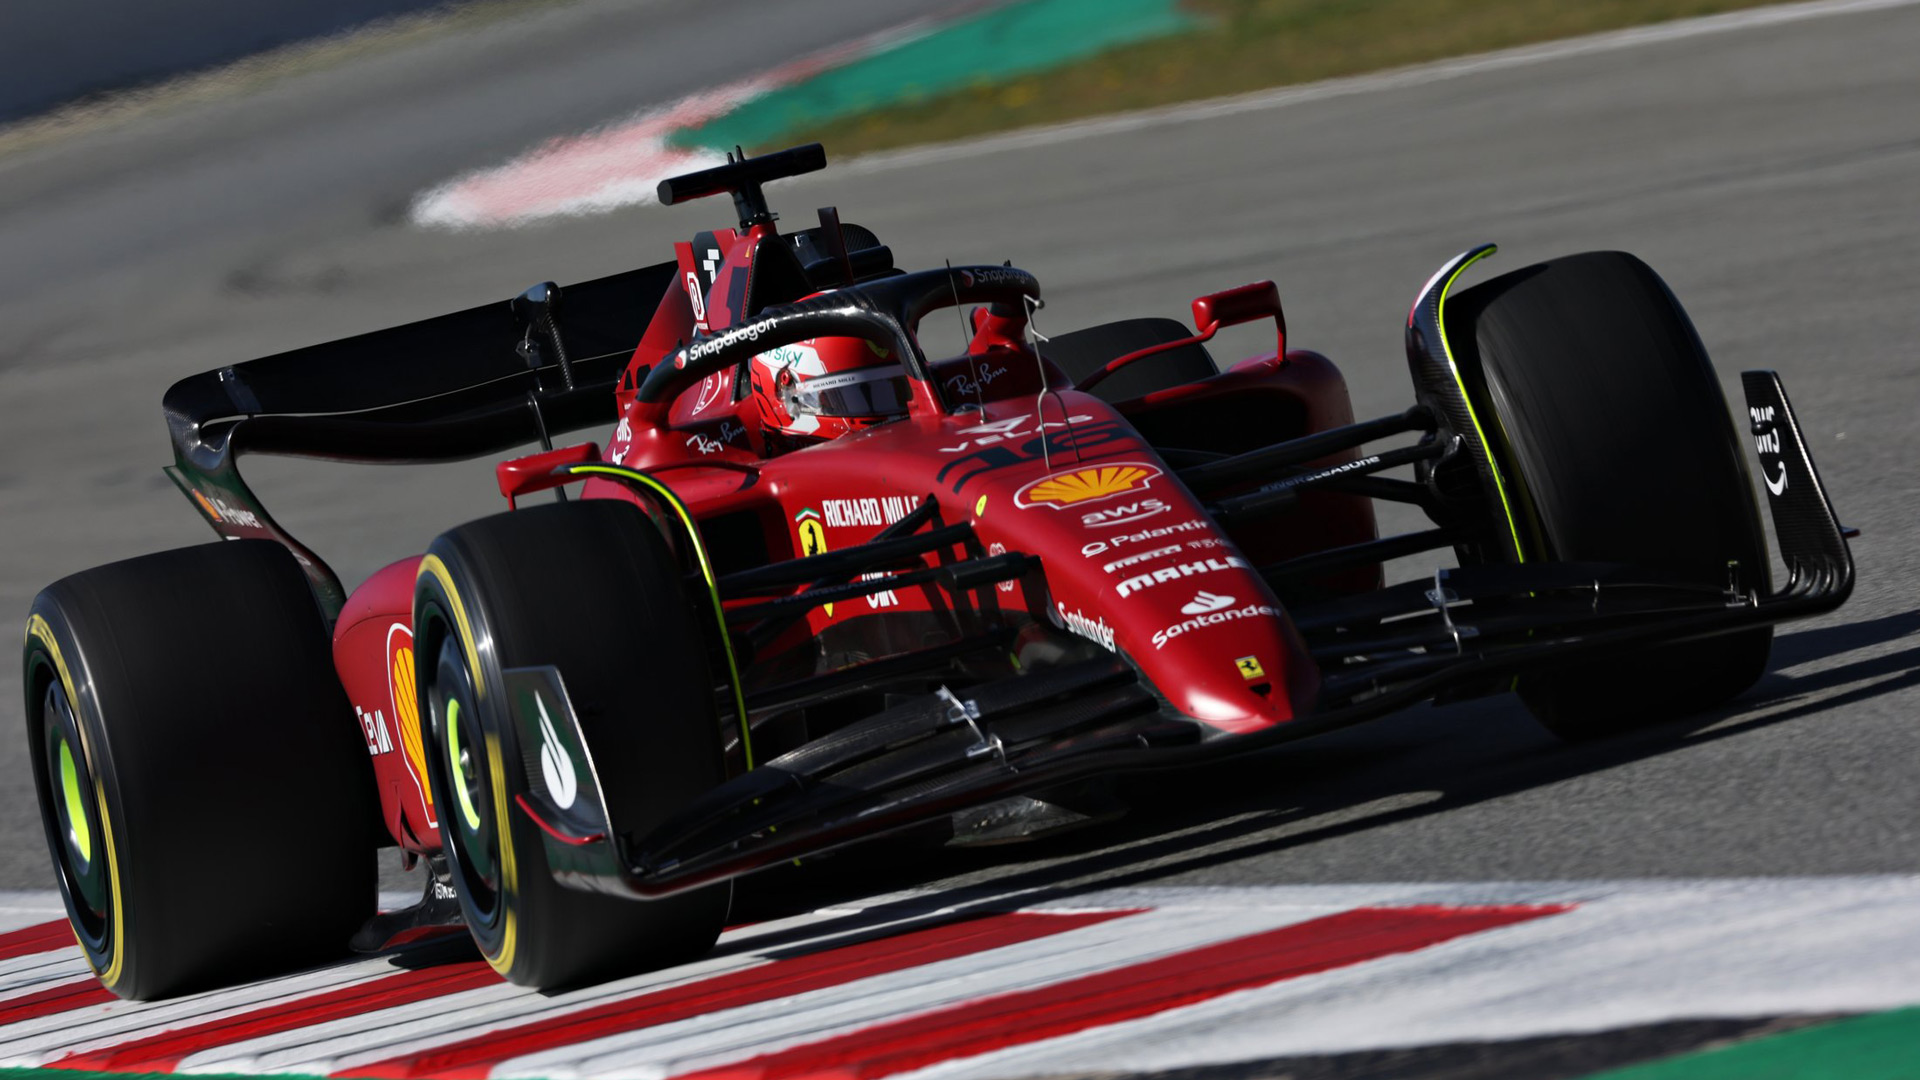 Charles Leclerc sets the fastest time on the morning of Day 1 in Barcelona. Formula 1®